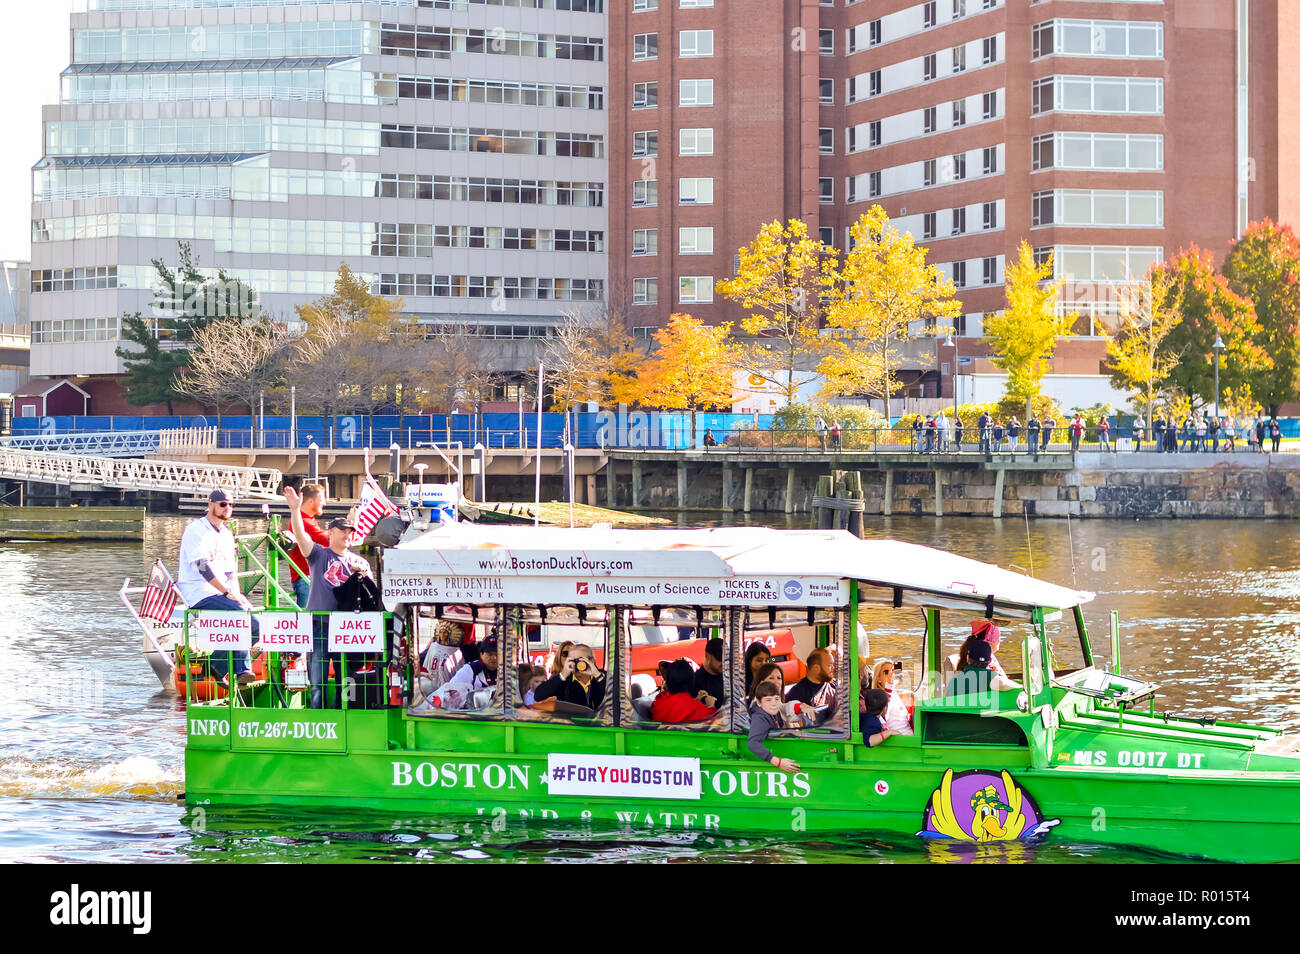 Red Sox pitcher buys duck boat after parade